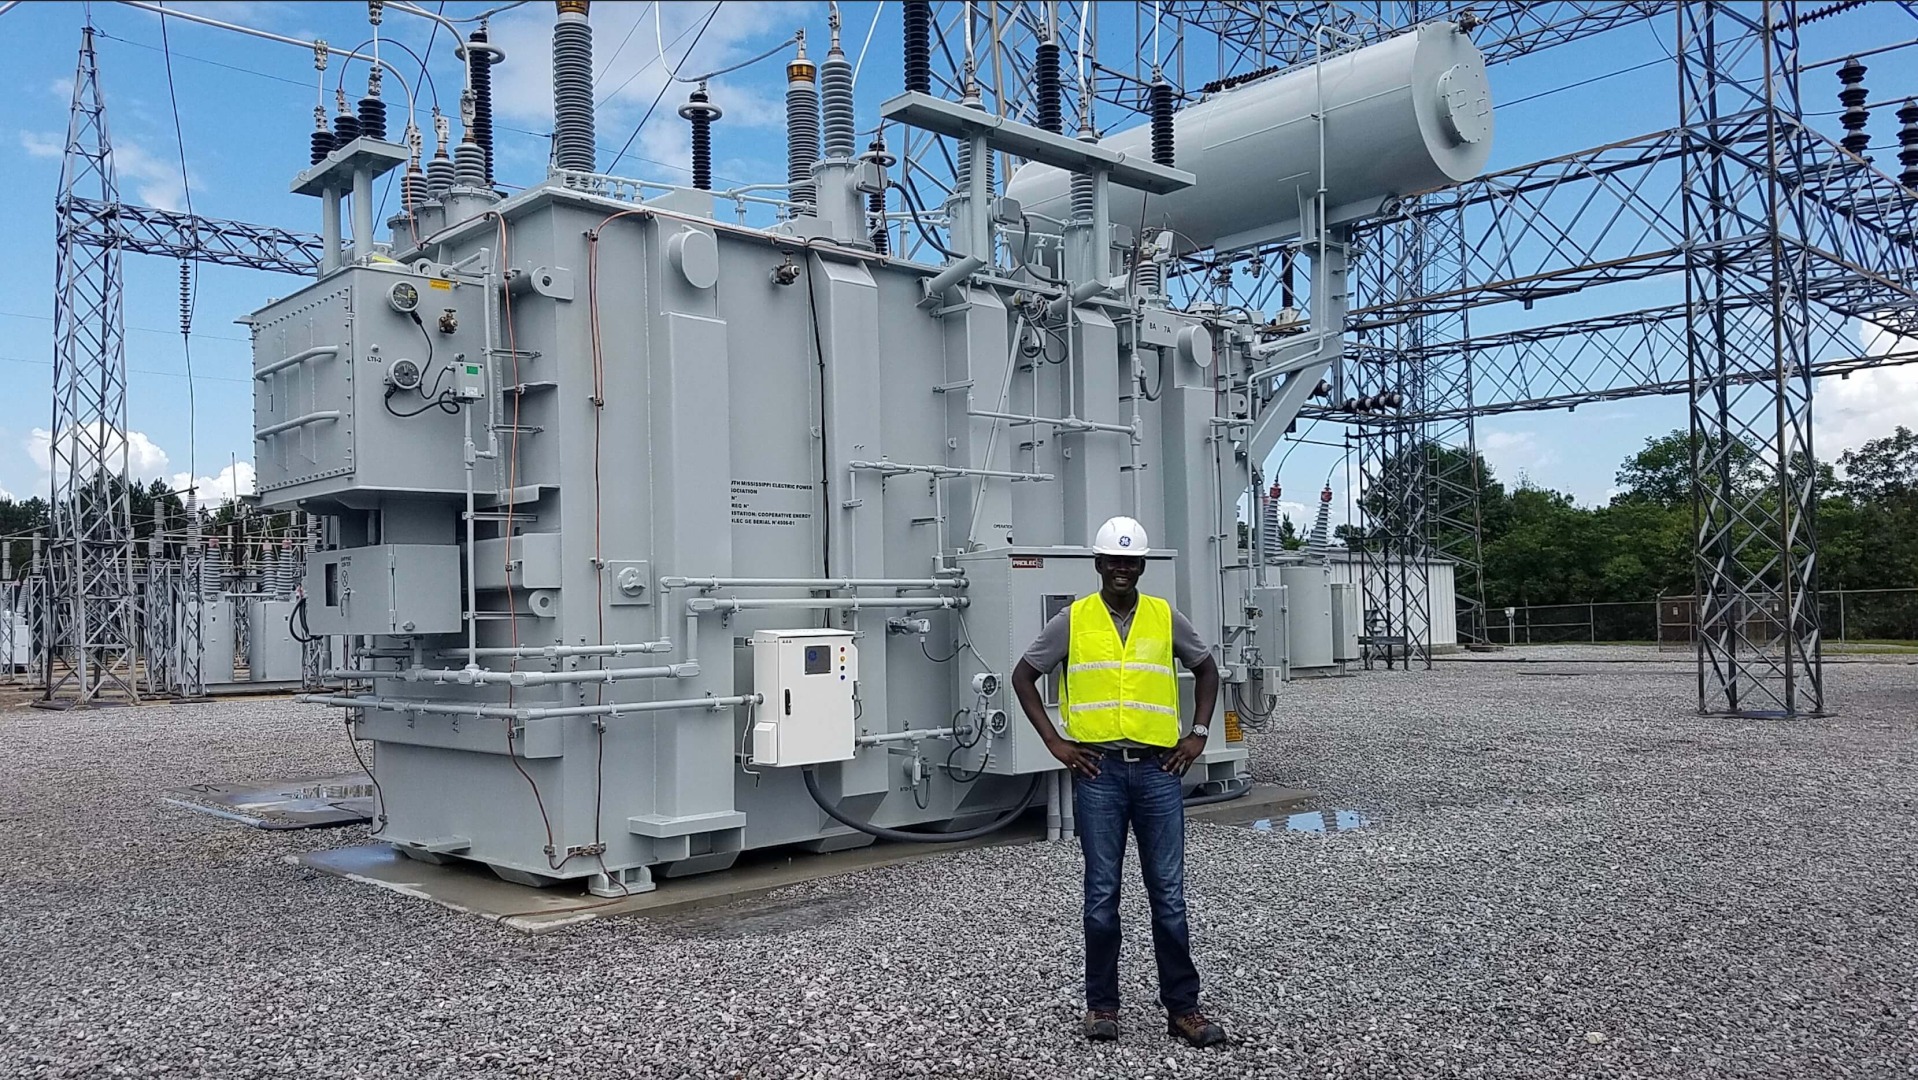 Common Reasons for Use Power Transformers in Residential Areas